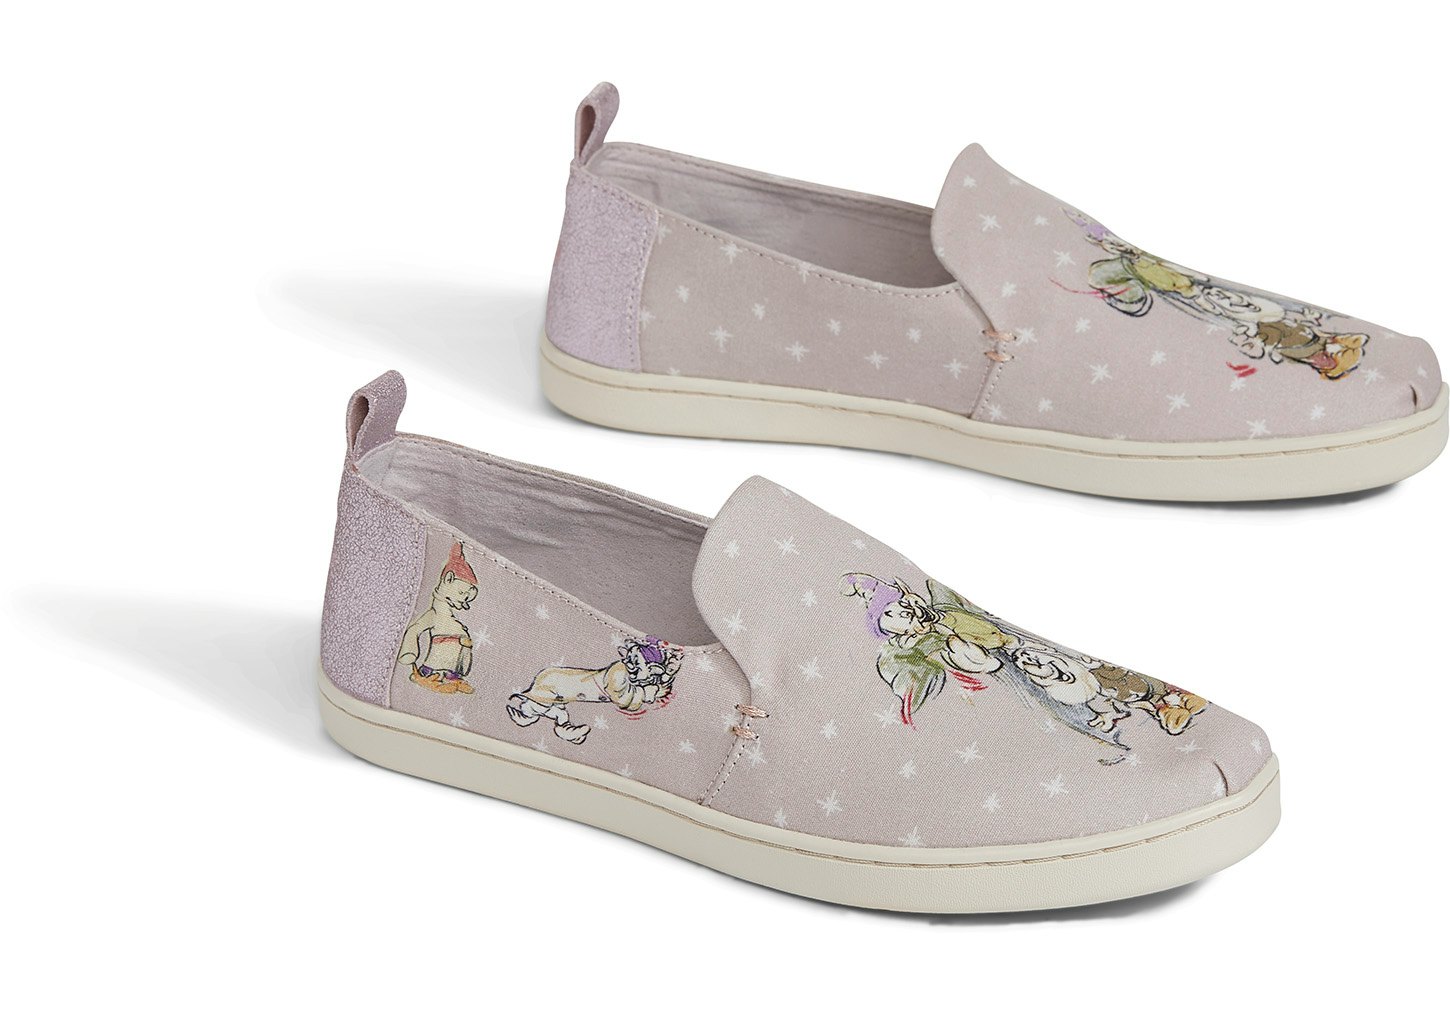 snow white toms shoes